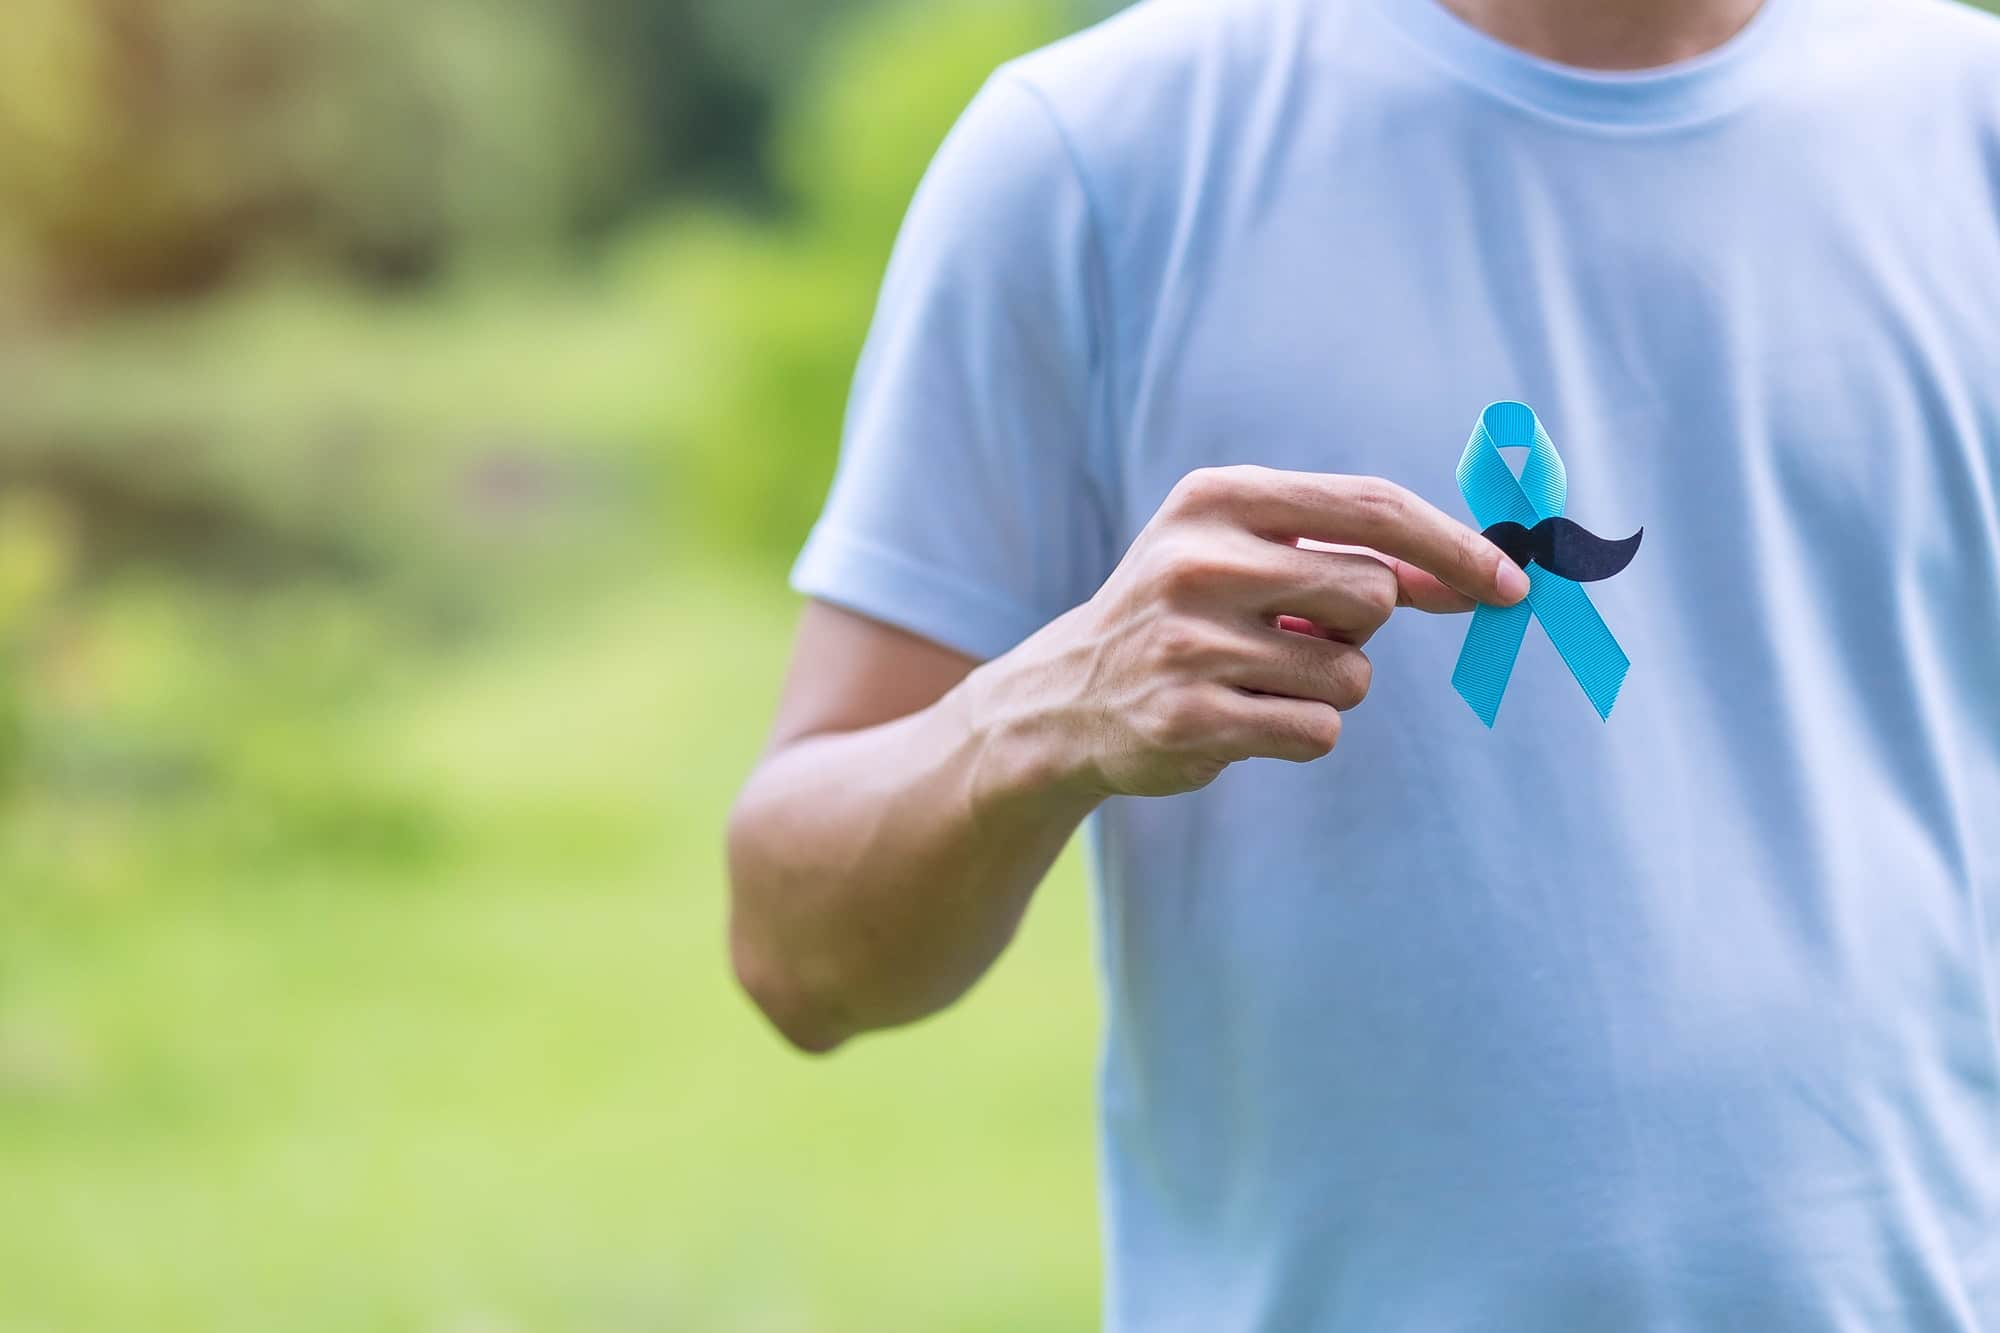 November Prostate Cancer Awareness month, Man in blue shirt with hand holding Blue Ribbon